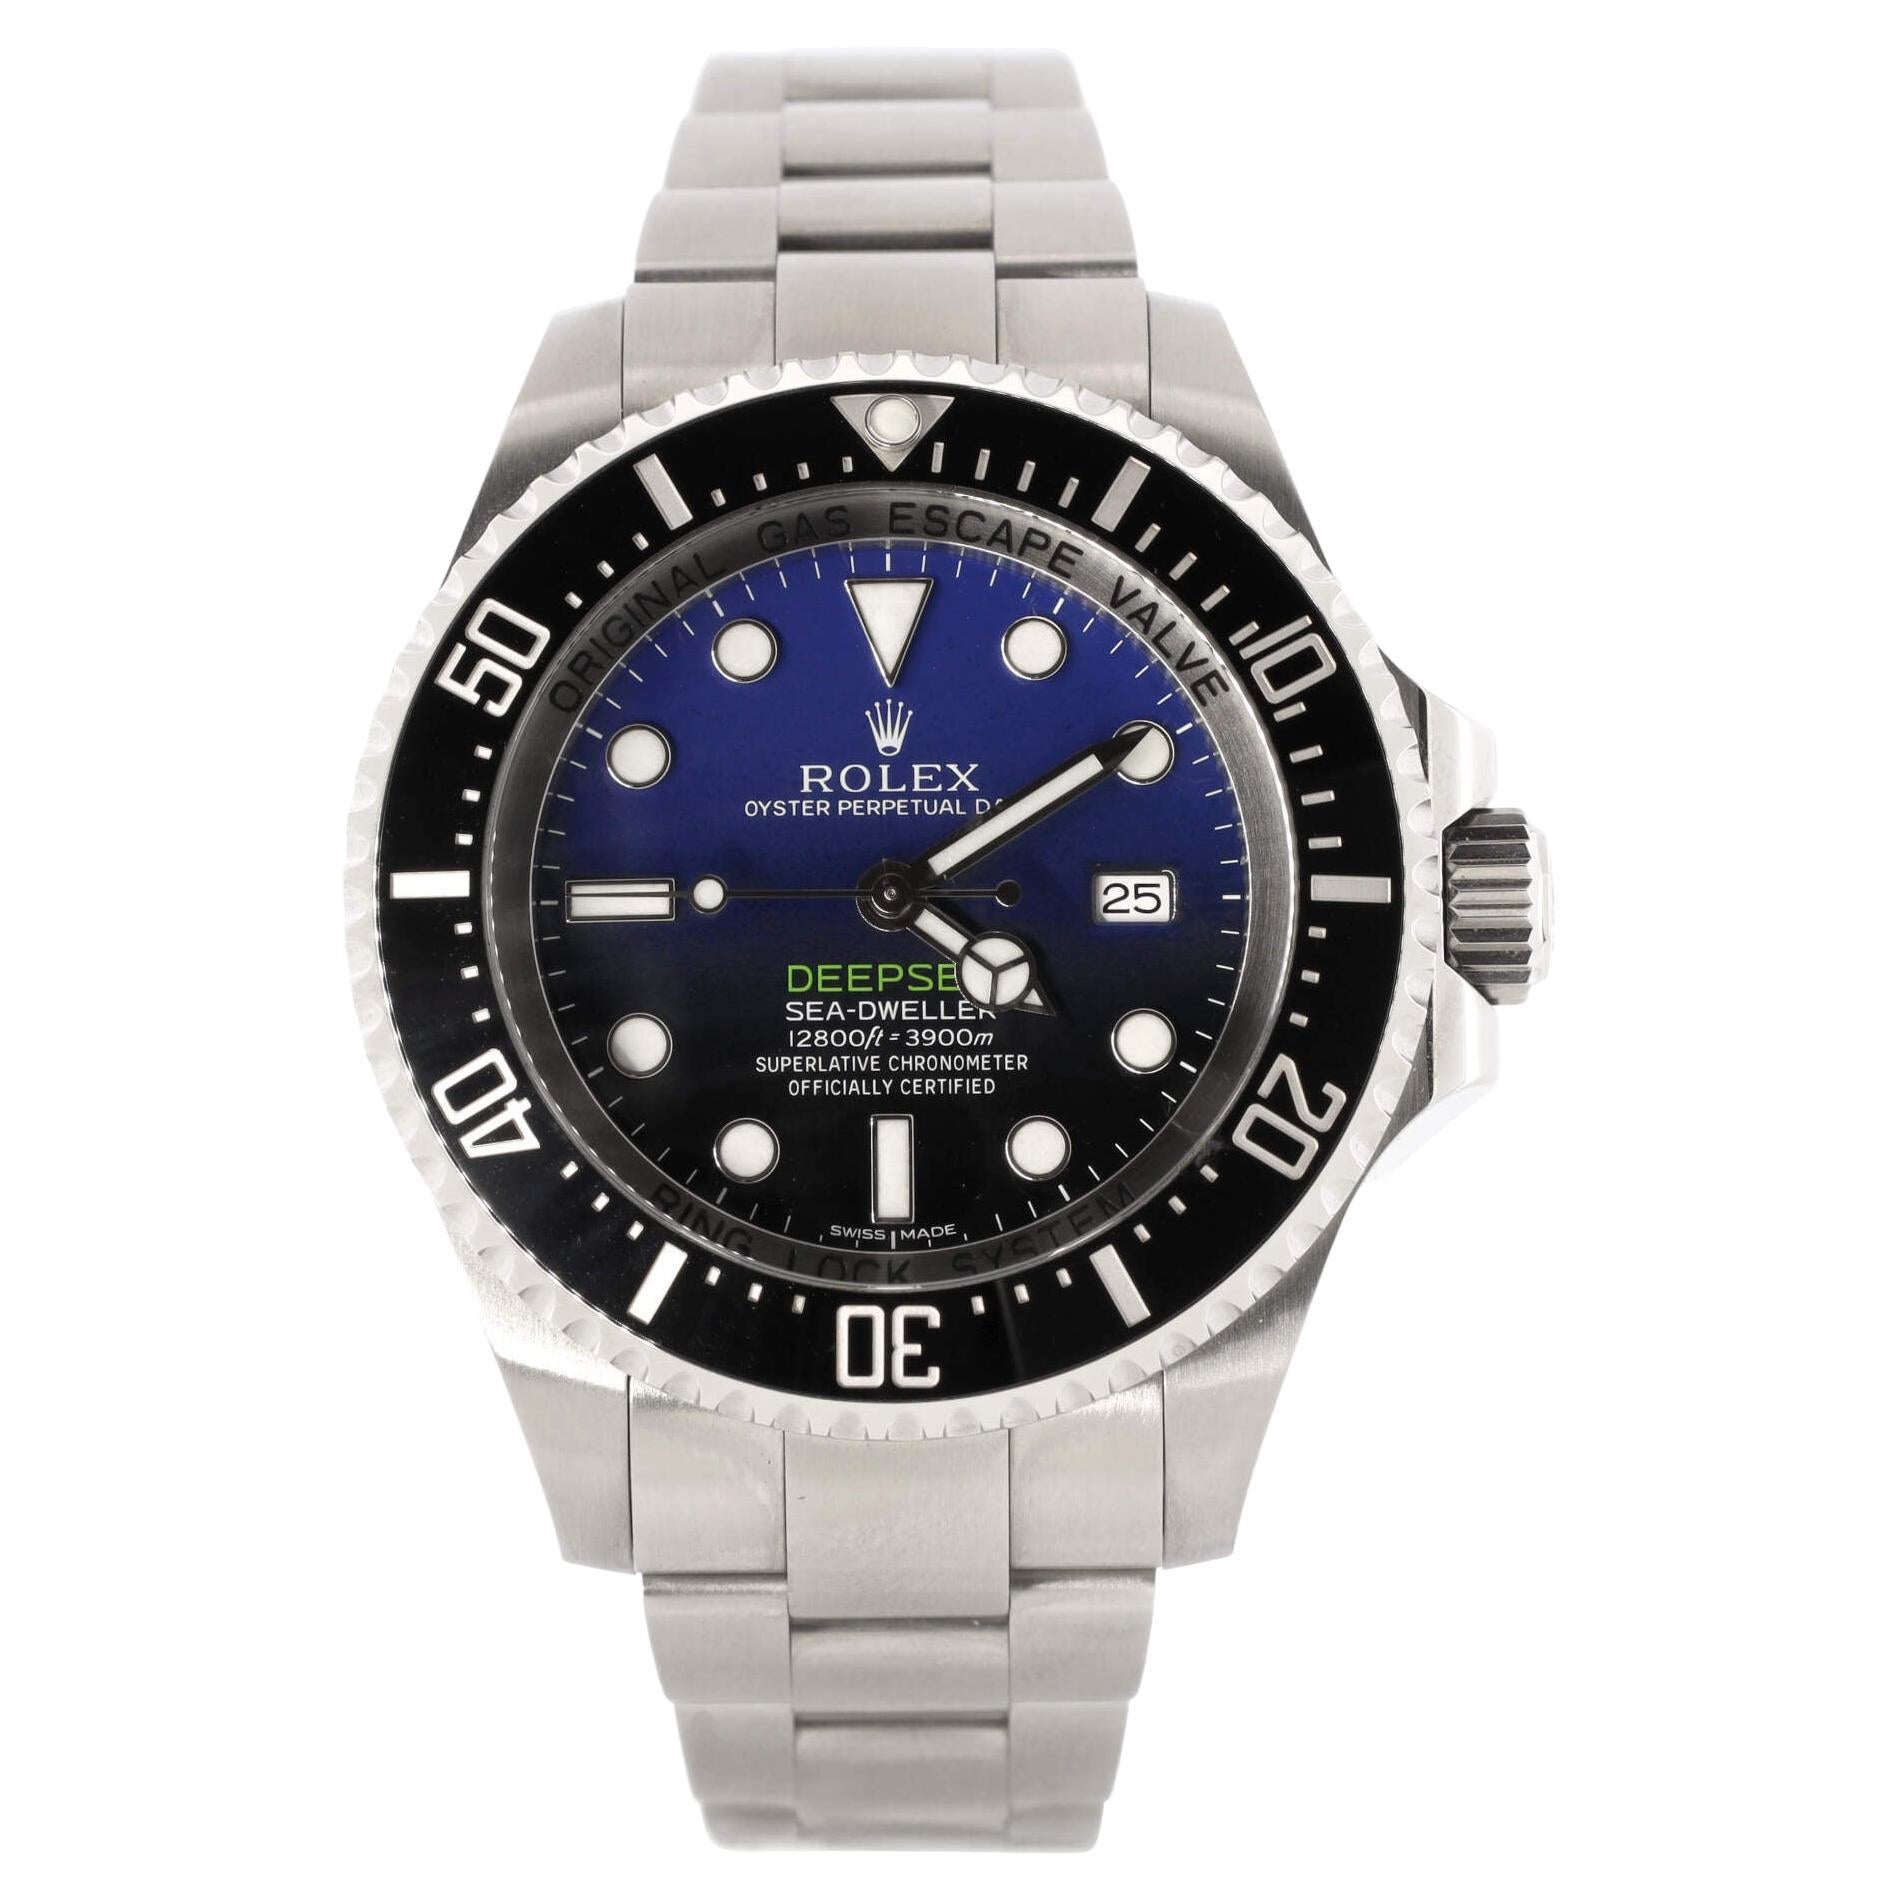 Rolex Oyster Perpetual Deepsea Sea-Dweller Automatic Watch Stainless Steel For Sale